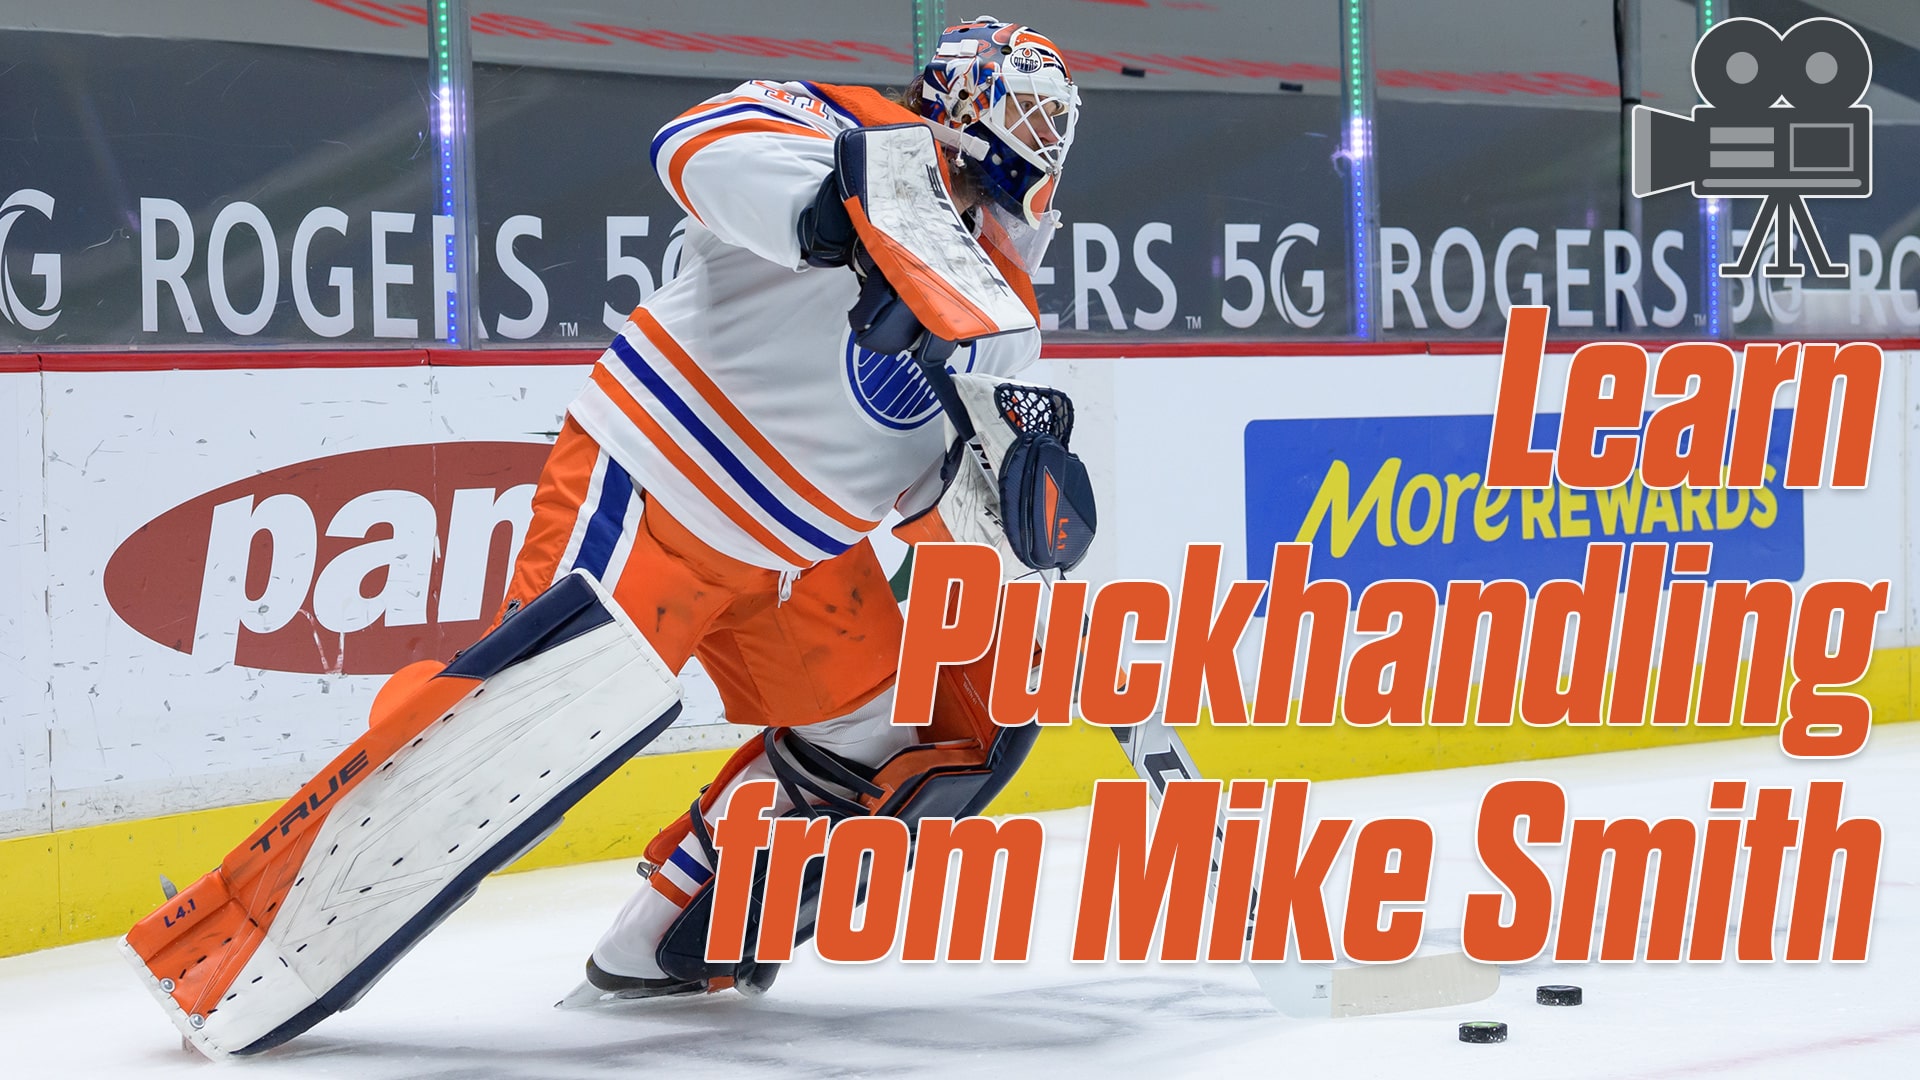 Puckhandling Lessons from Mike Smith – Part 1